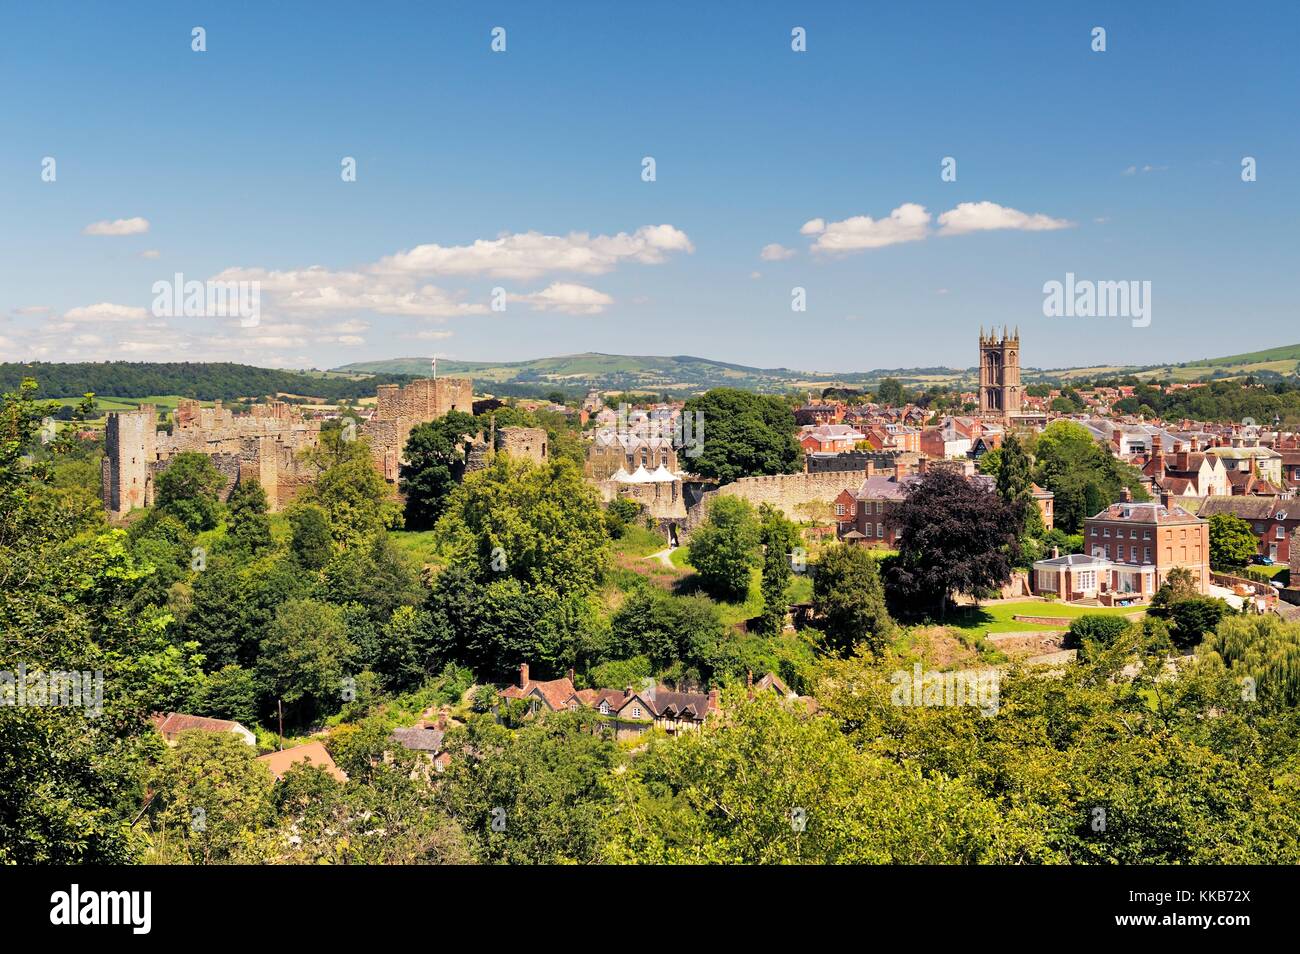 North East over the mediaeval castle and market town of Ludlow, Shropshire, England, UK Stock Photo